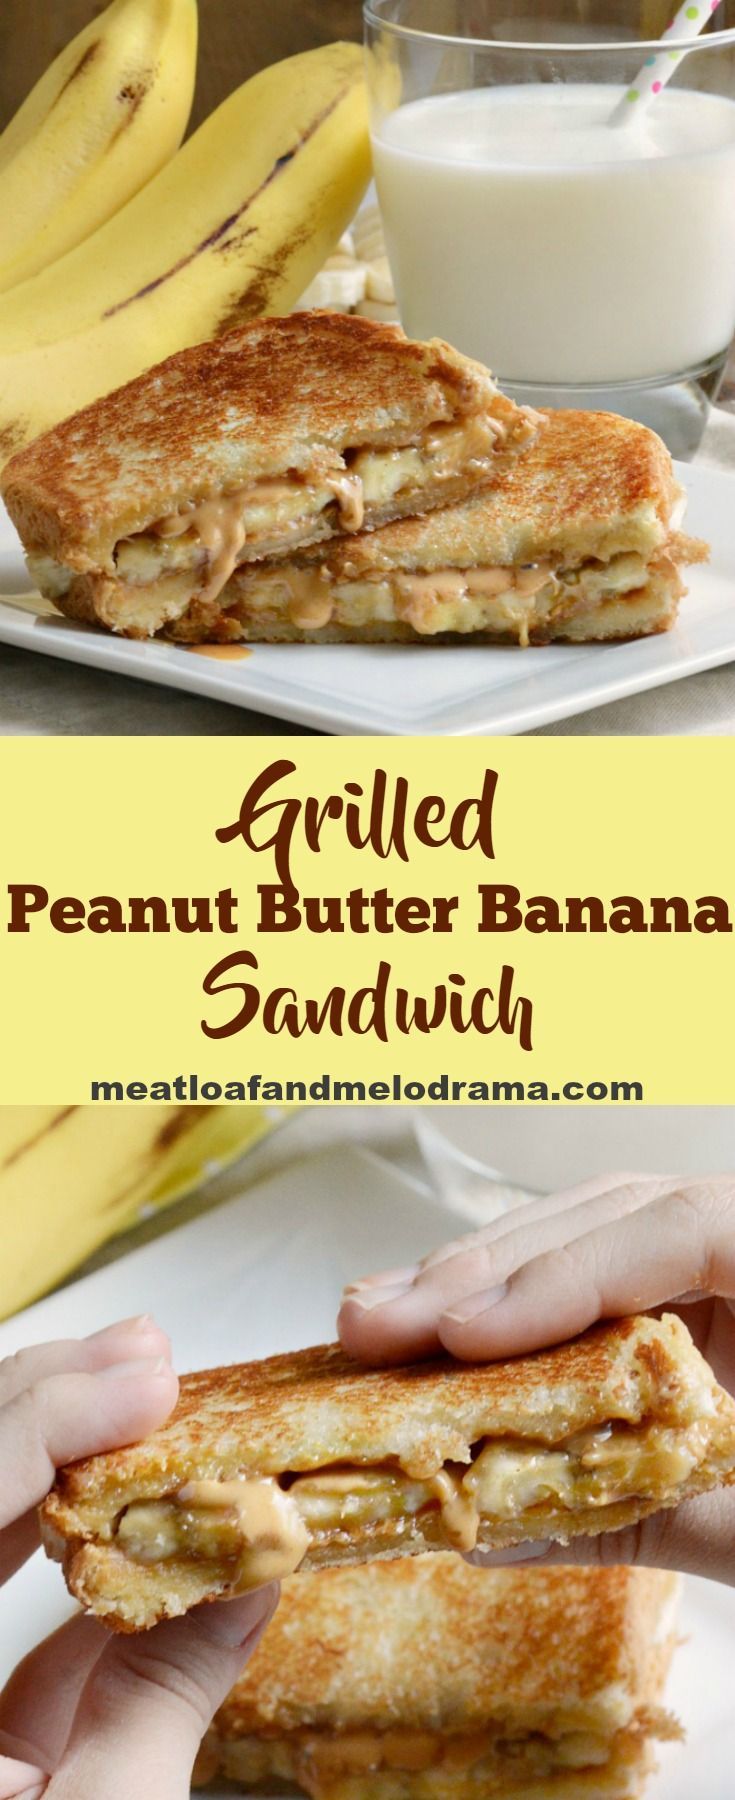 Grilled Peanut Butter Banana Sandwich - A quick and easy dinner, lunch or snack for kids of all ages! from Meatloaf and Melodrama -   21 grilling recipes for kids
 ideas